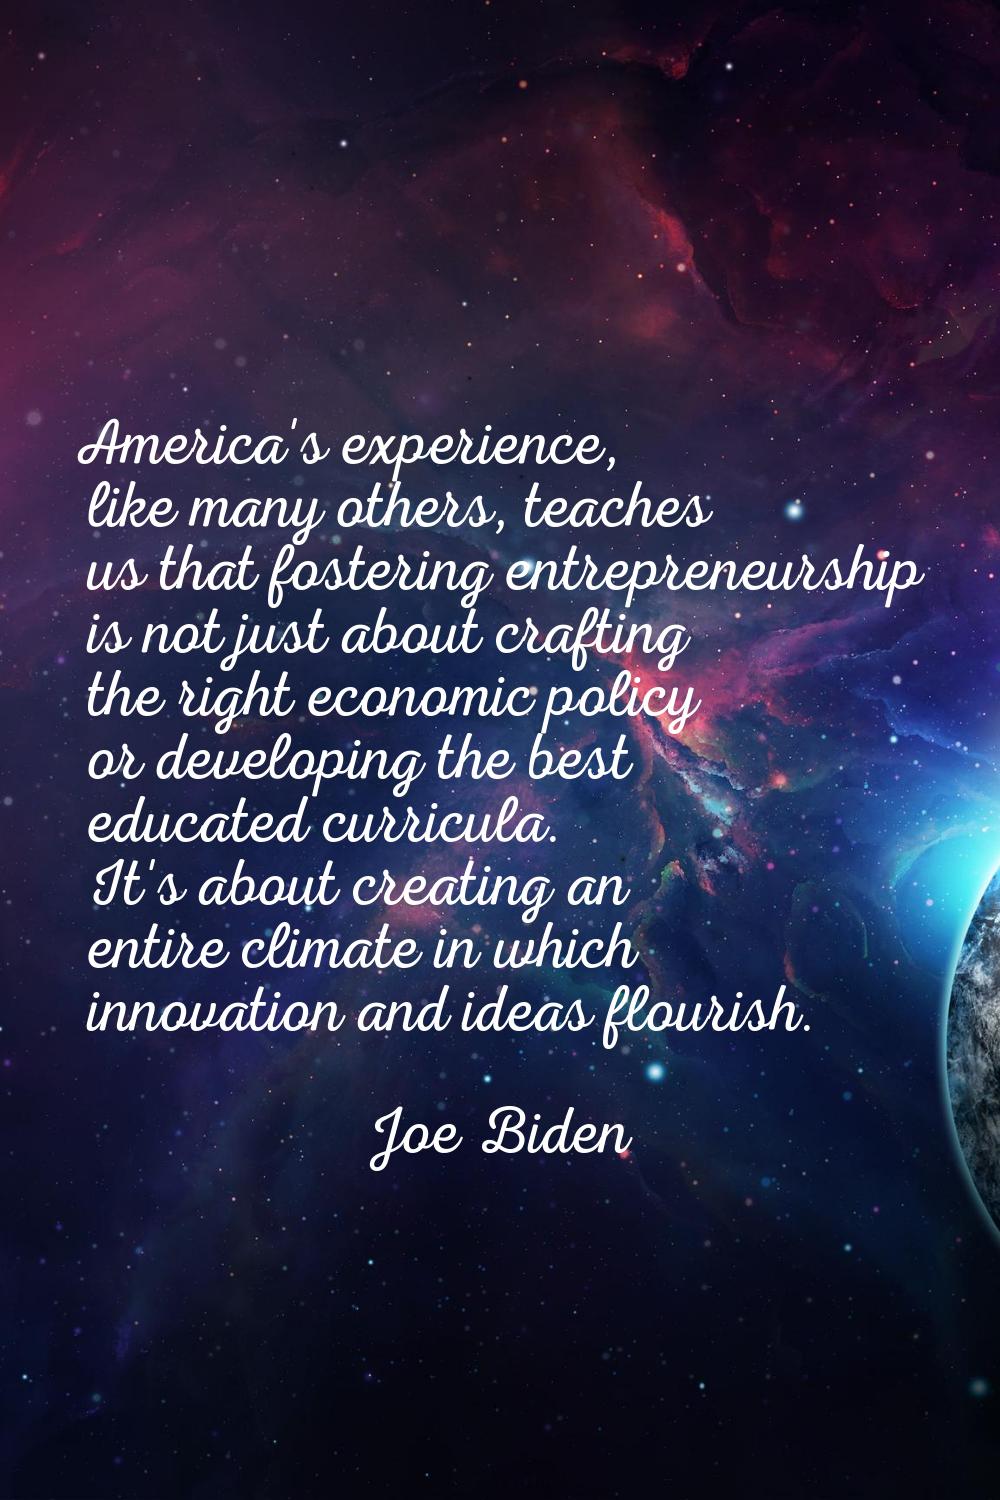 America's experience, like many others, teaches us that fostering entrepreneurship is not just abou